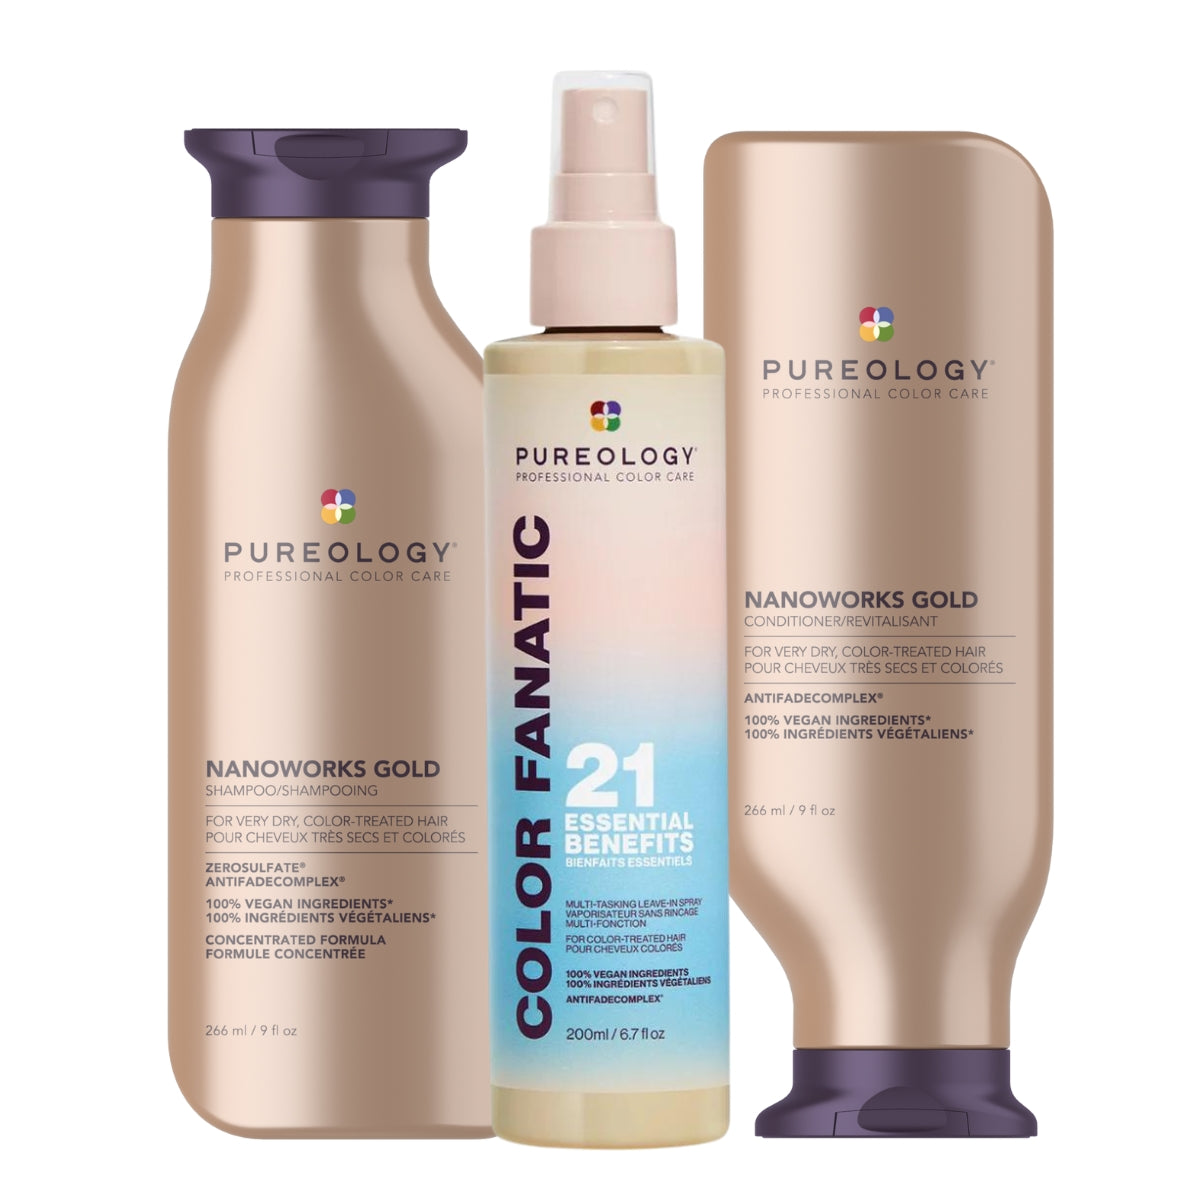 Pureology Nanoworks Gold Shampoo, Conditioner and Color Fanatic Leave In Conditioner Bundle For Dry, Dull Hair, Vegan Formulas